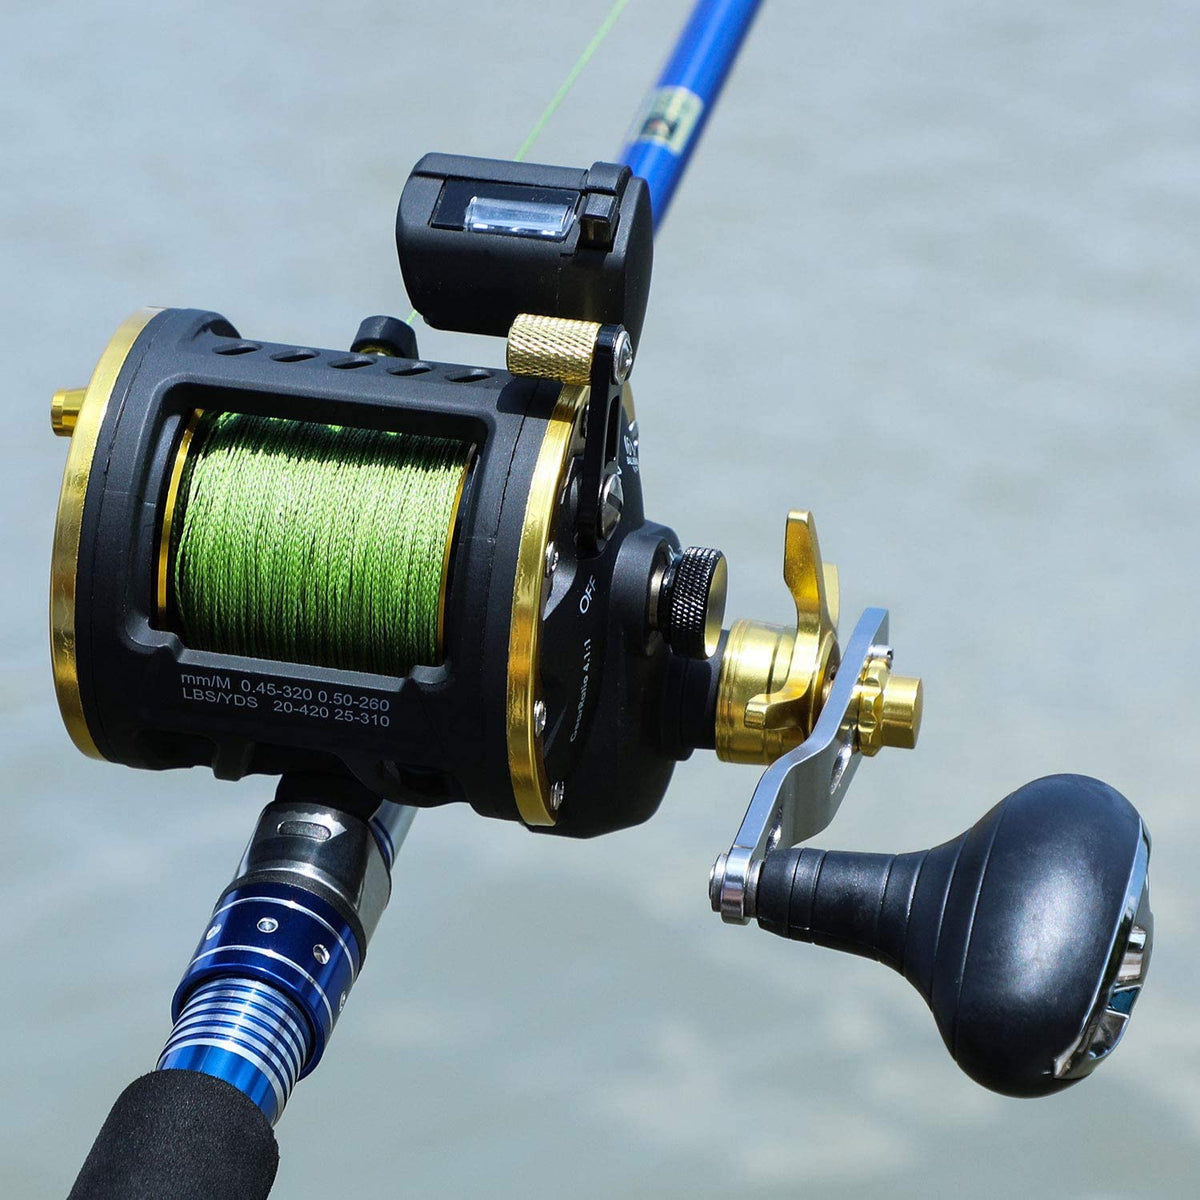 Sougayilang Line Counter Trolling Reel Conventional Level Wind Fishing Reel, Size: Thunder LS II 4000 Right Handed